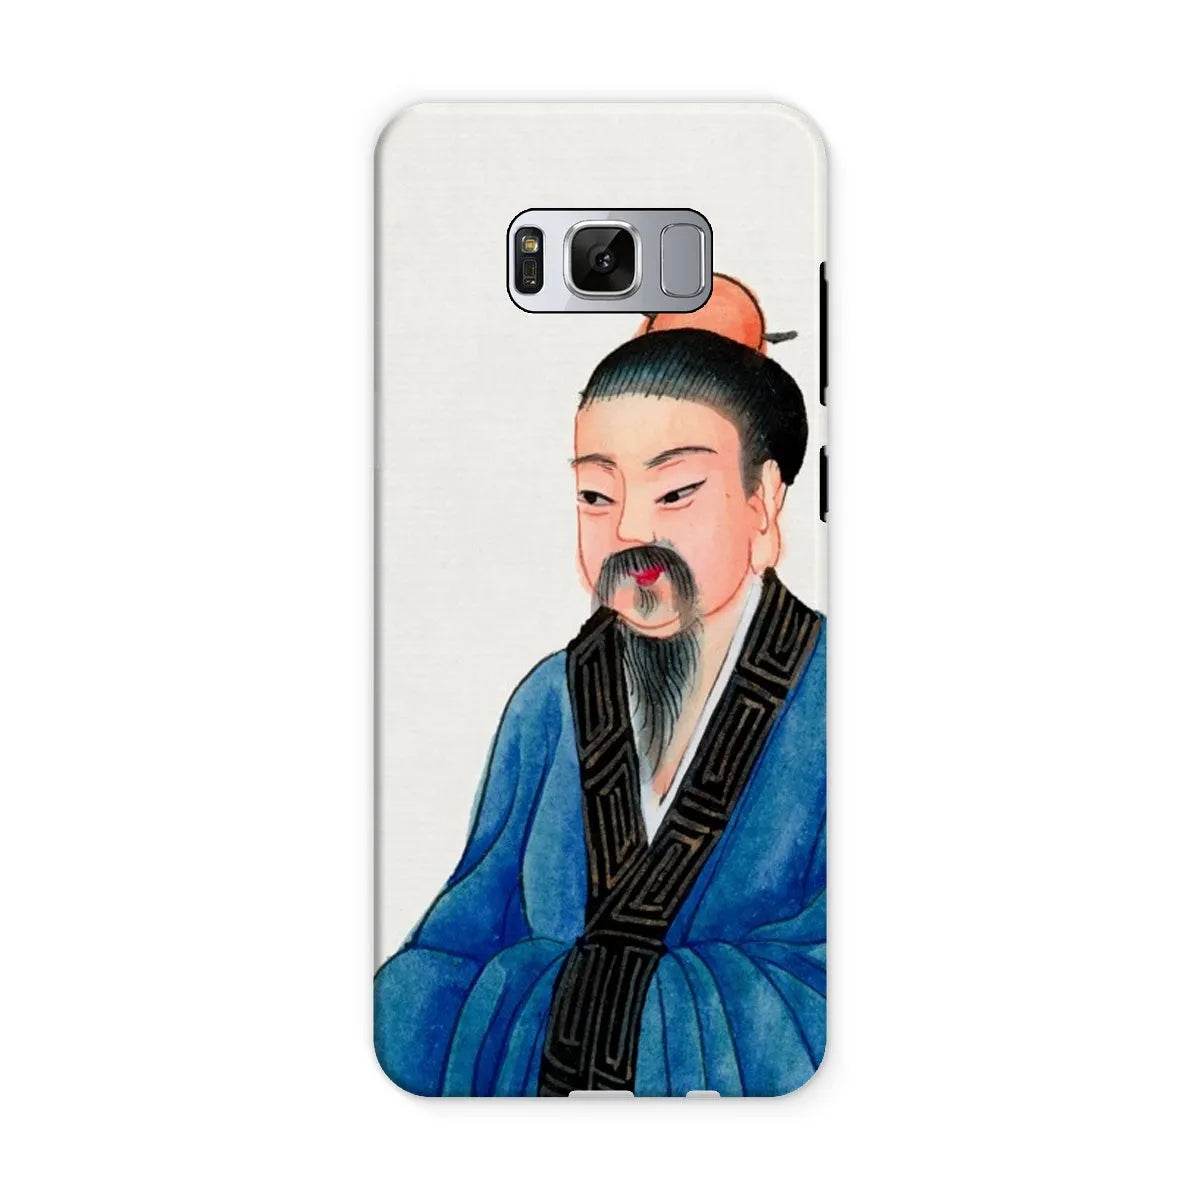 Grand Master - Chinese Buddhist Aesthetic Art Phone Case - Samsung Galaxy S8 / Matte - Mobile Phone Cases - Aesthetic